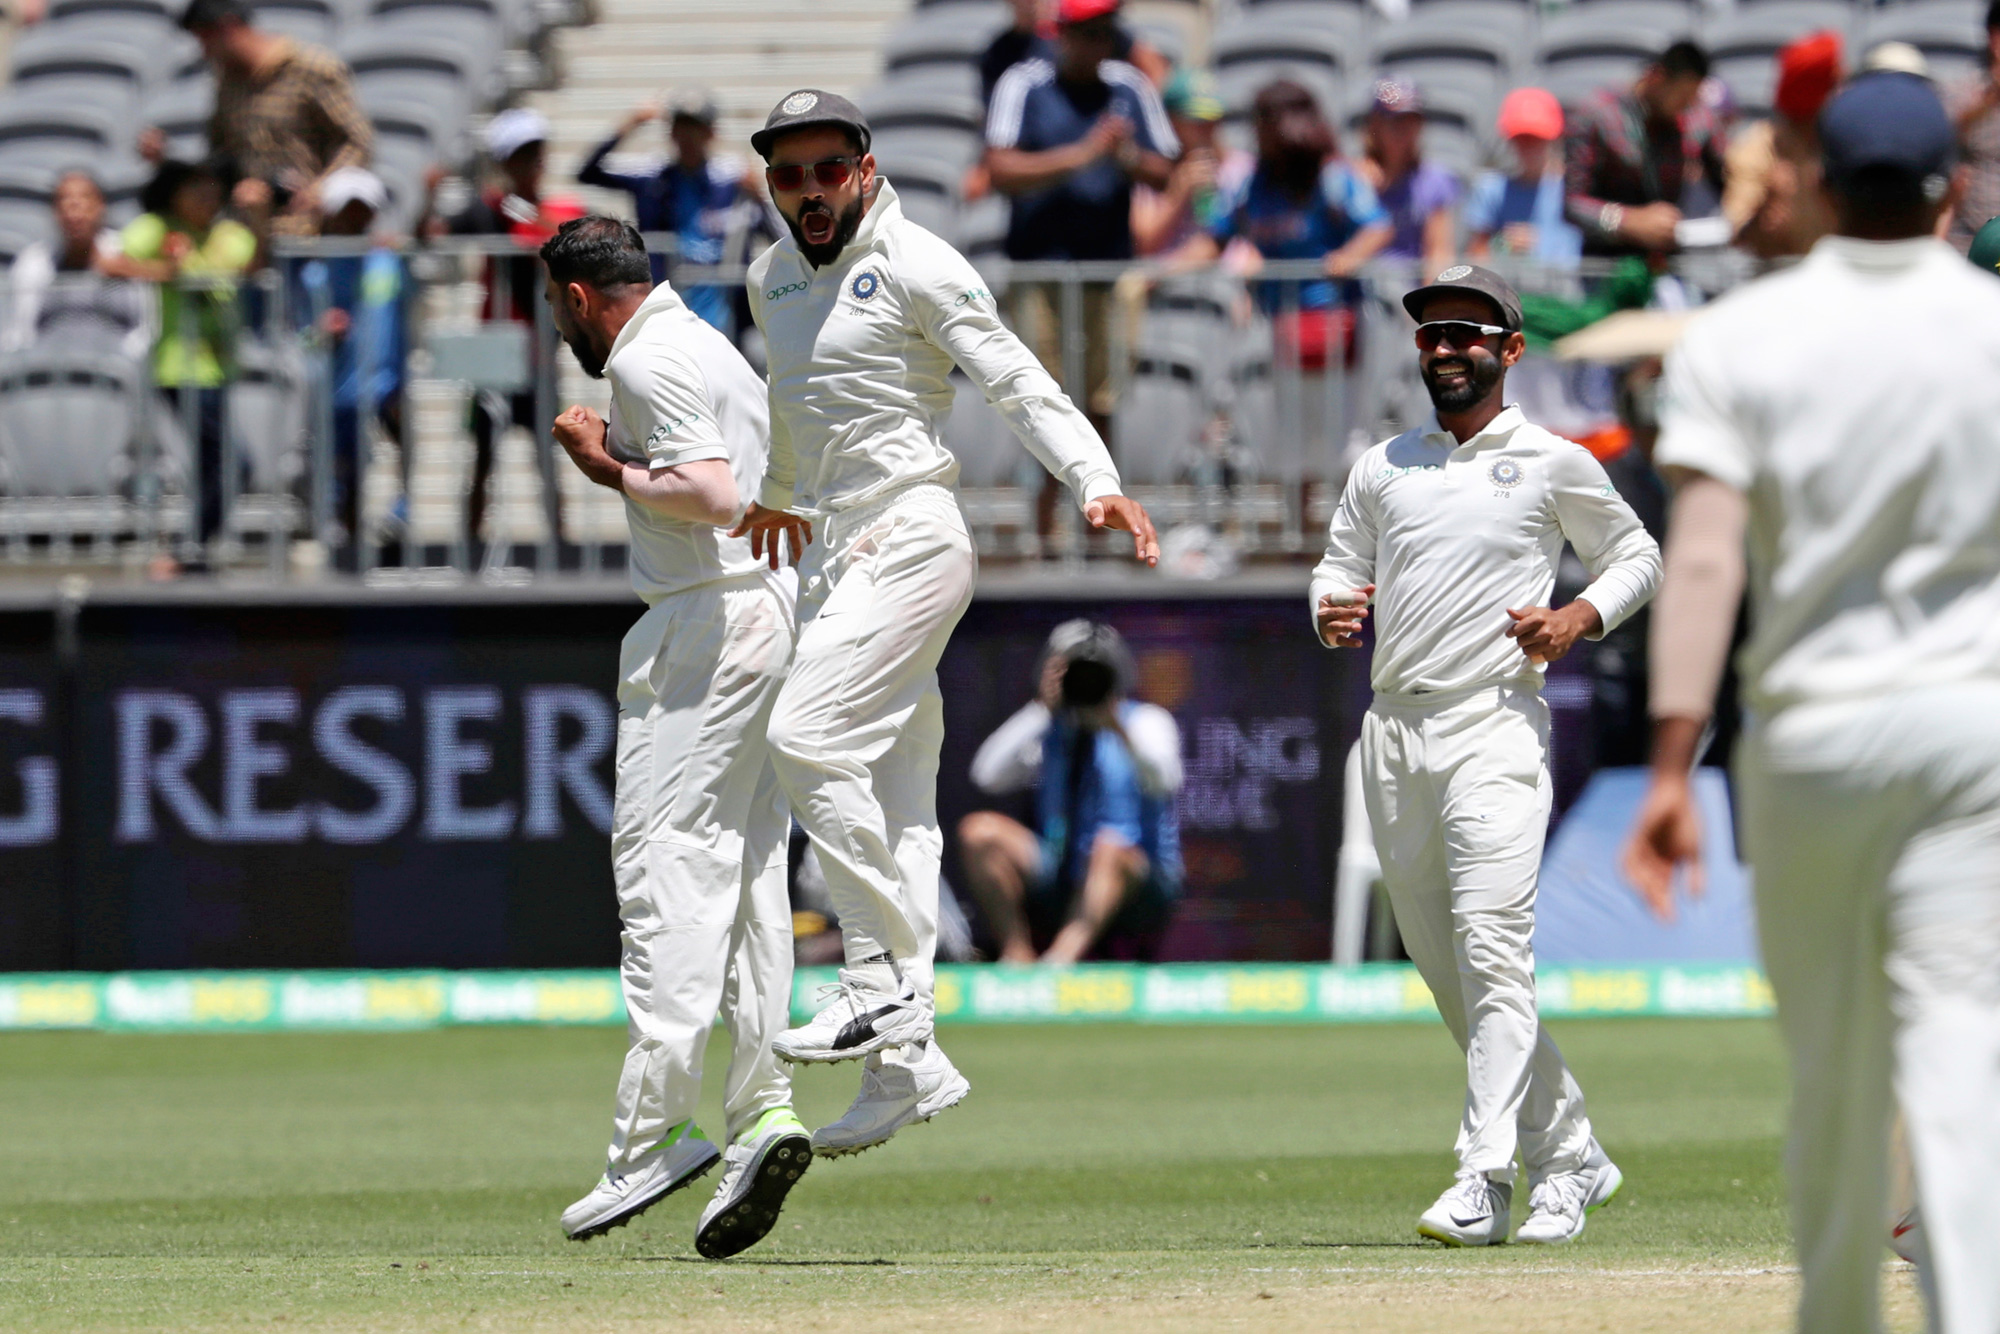 India's Mohammed Shami, left, and Virat Kohli leap as they celebrate the dismissal of Australia's Aaron Finch during play in the second cricket test between Australia and India in Perth, Australia, on Monday, December 17, 2018.